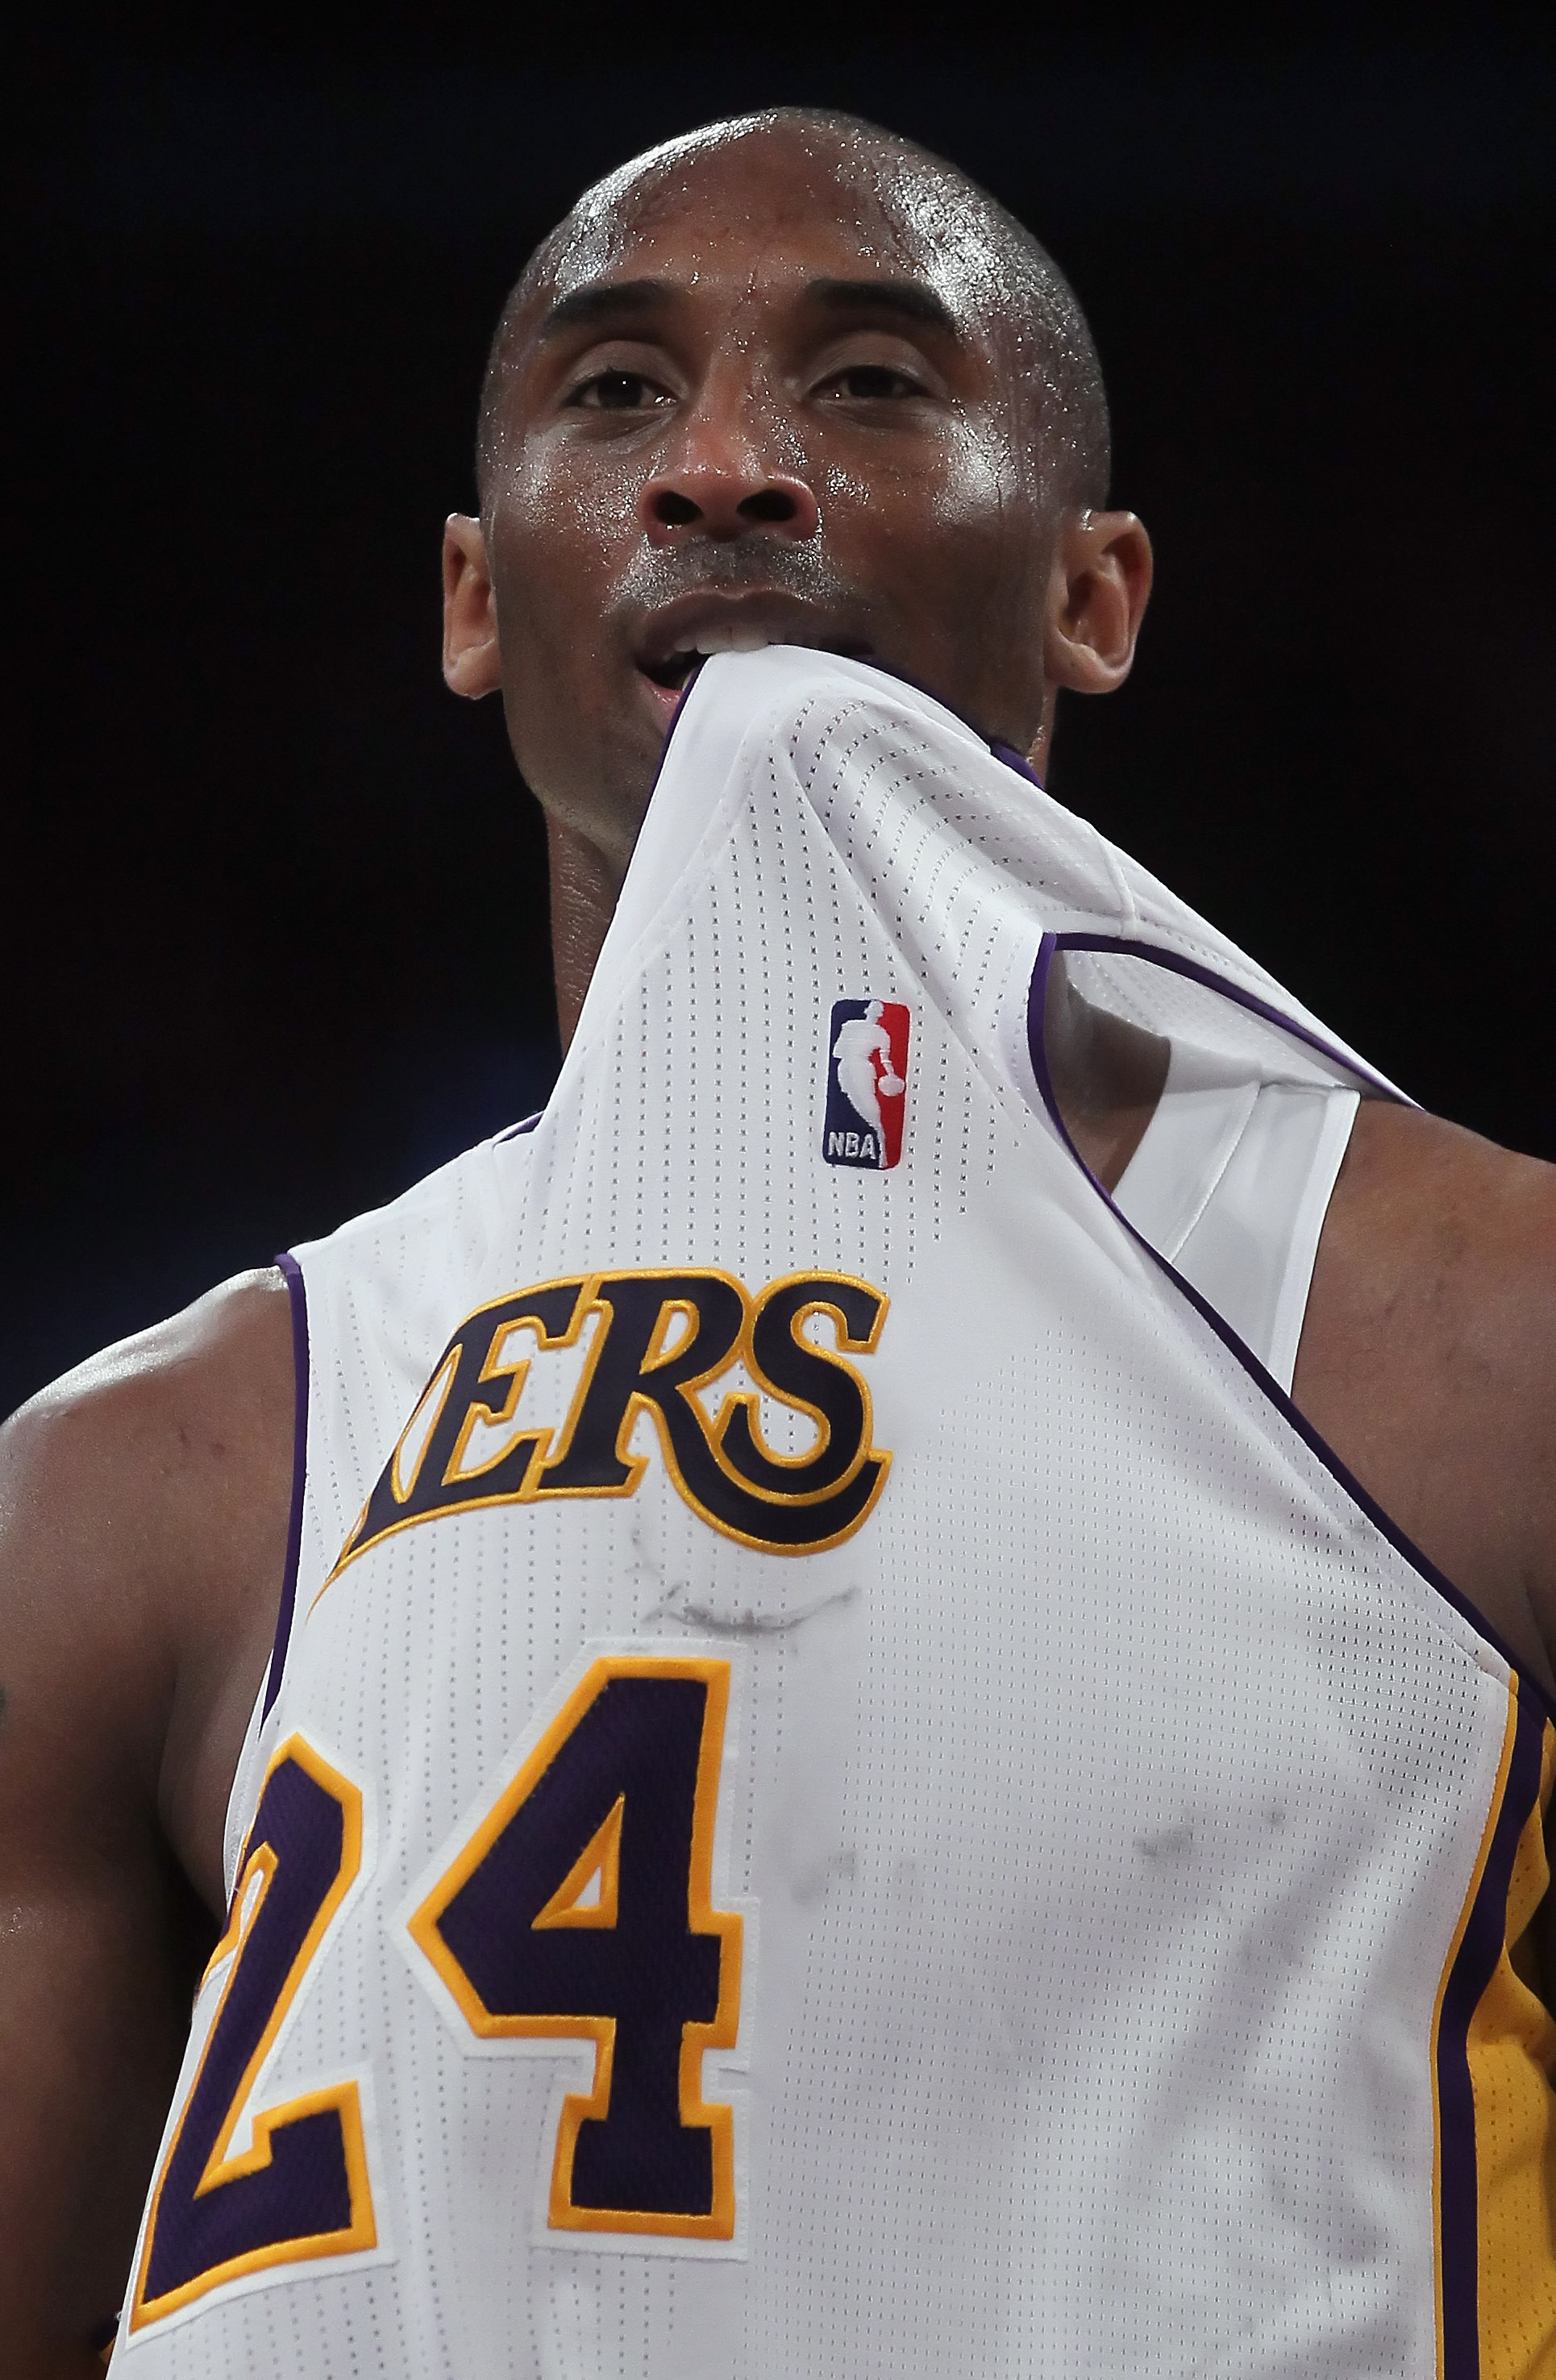 LOS ANGELES, CA - APRIL 10:  Kobe Bryant #24 of the Los Angeles Lakers puts his jersey in his mouth after committing a foul in the second half against the Oklahoma City Thunder at Staples Center on April 10, 2011 in Los Angeles, California. The Thunder de